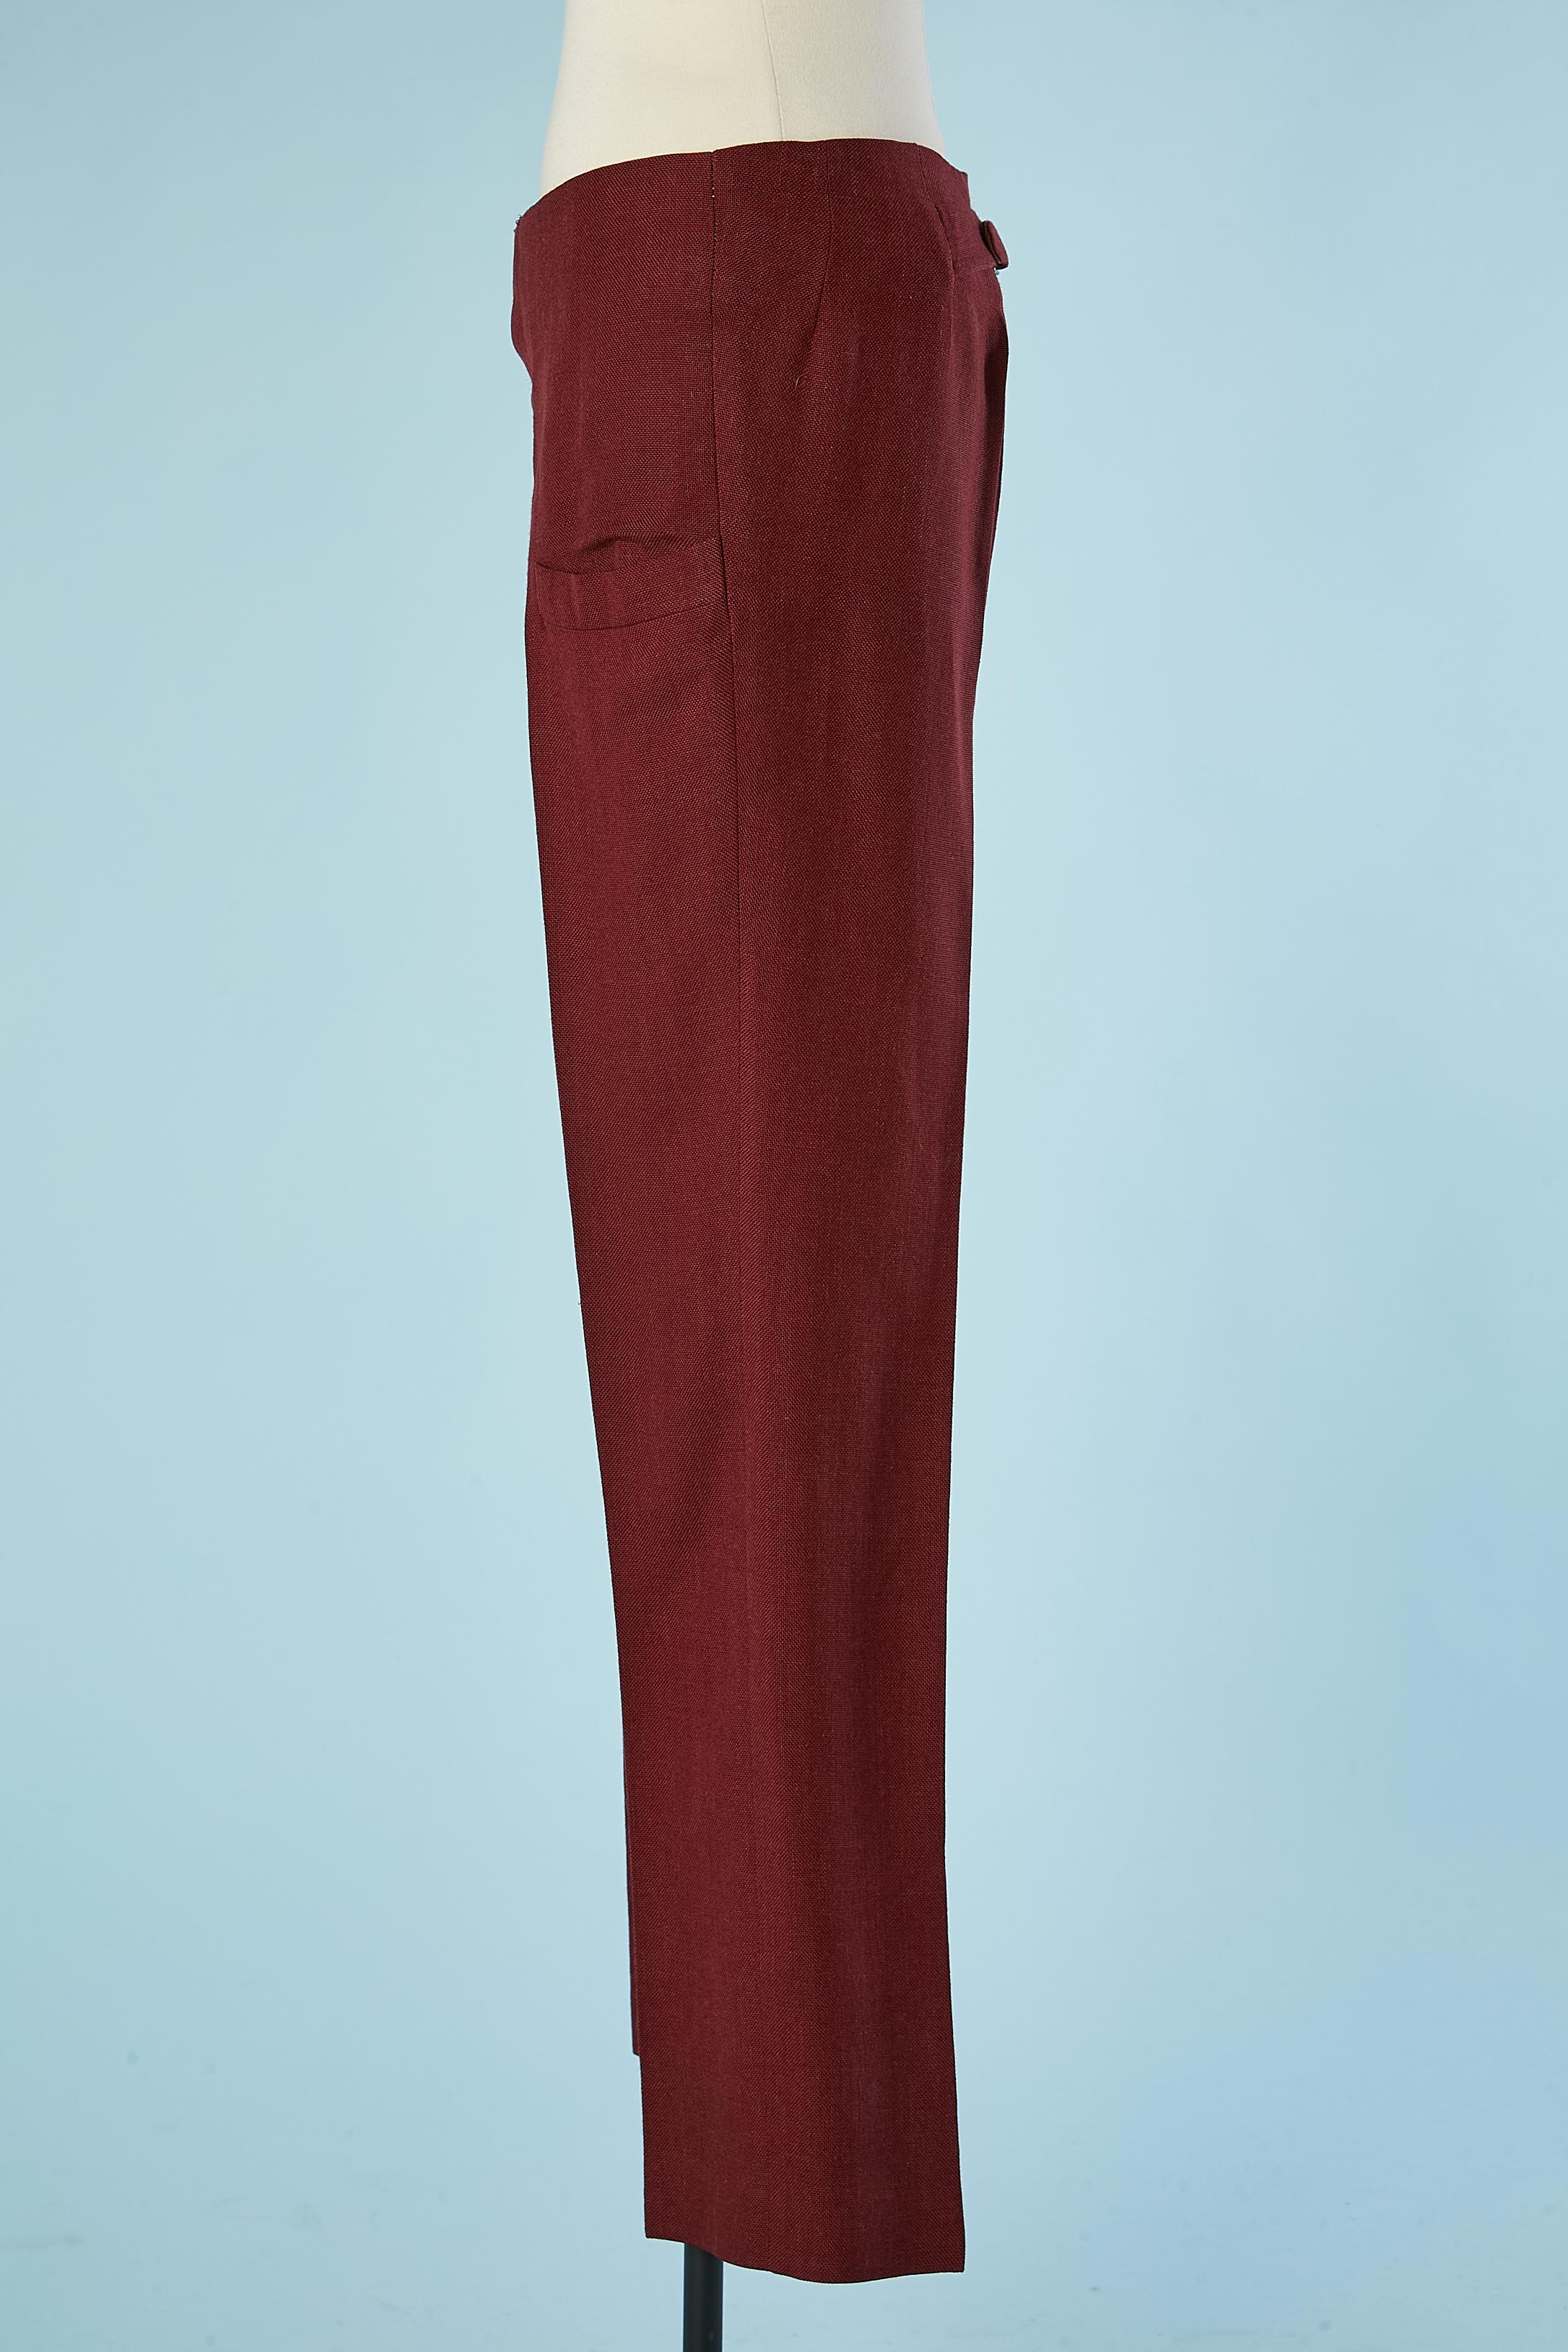 Brown Burgundy linen and acrylic high-waisted trouser Pierre Cardin  For Sale